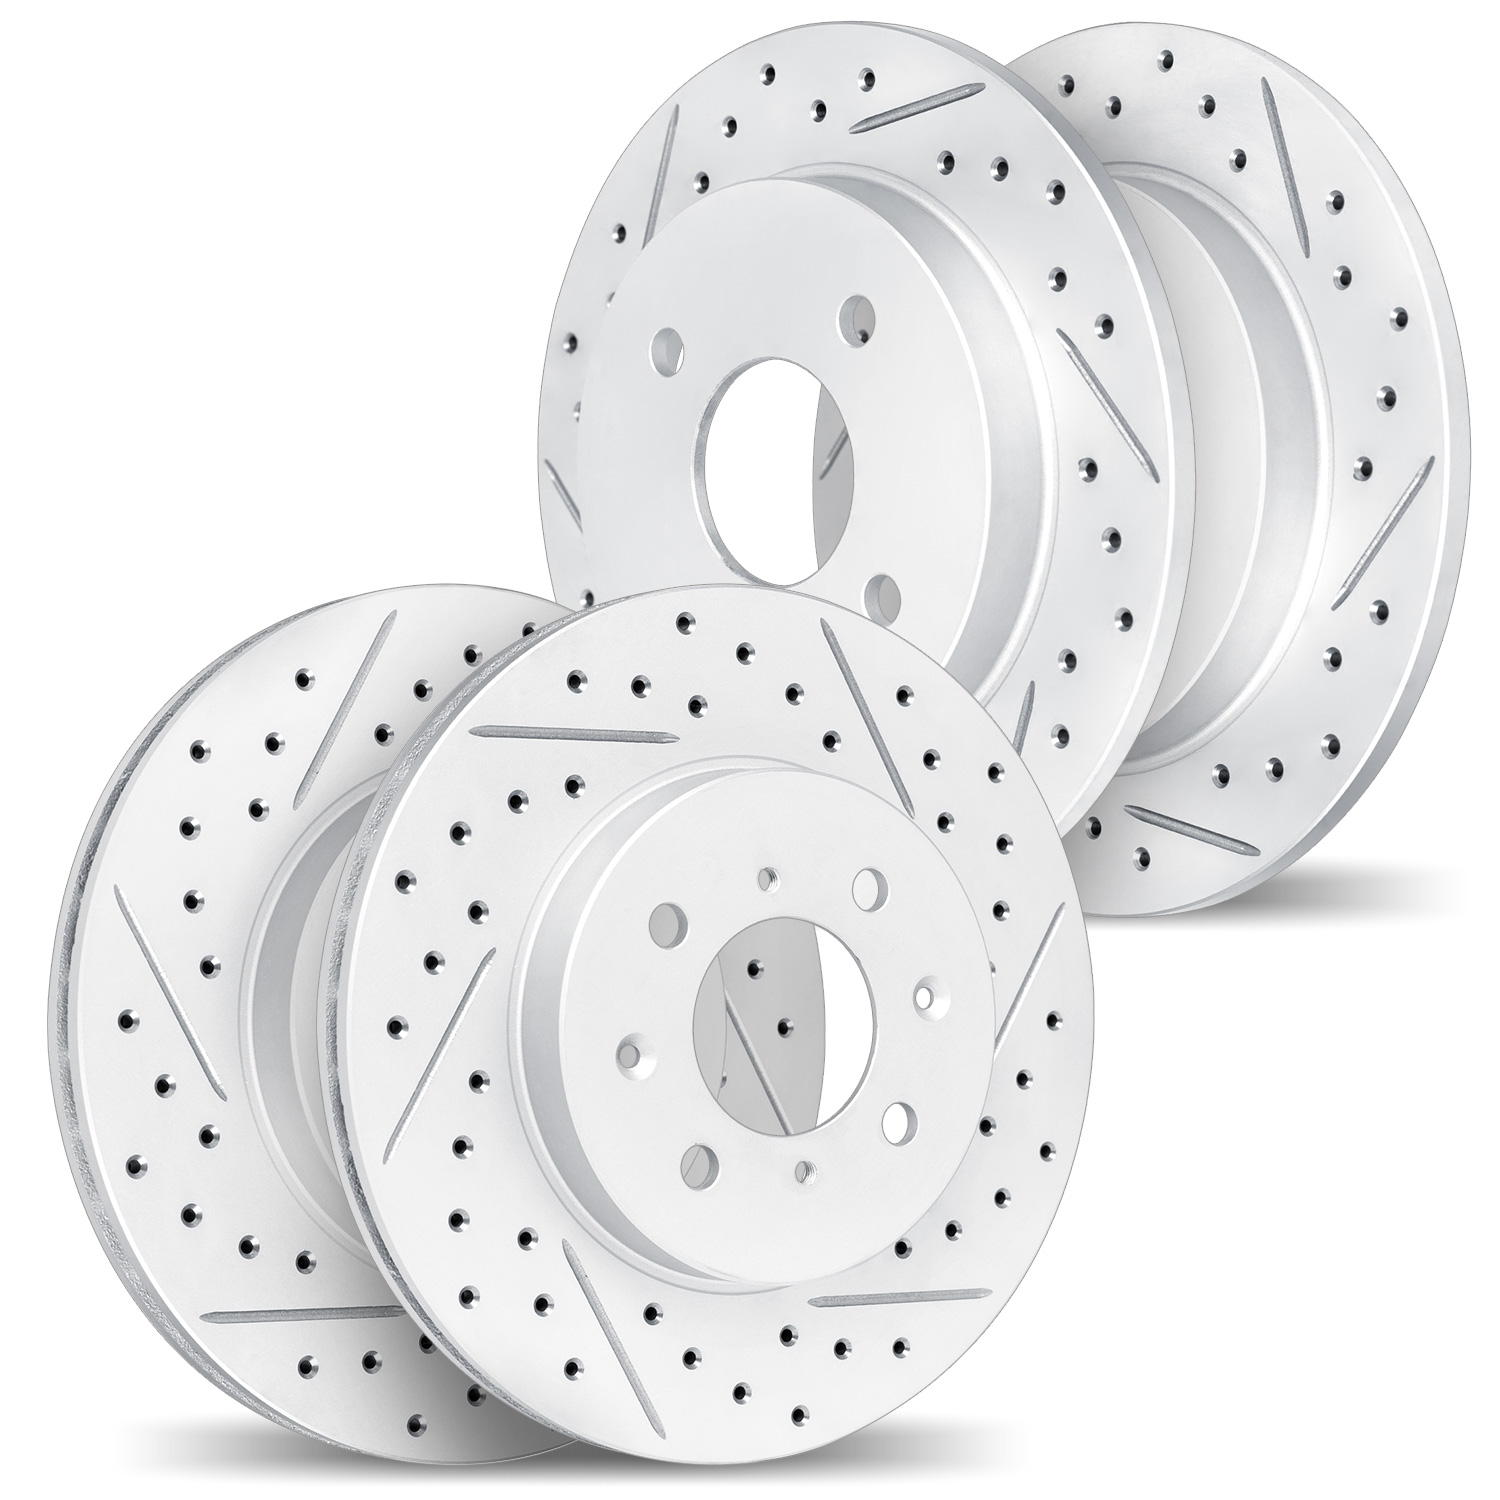 2004-59001 Geoperformance Drilled/Slotted Brake Rotors, 1998-2002 Acura/Honda, Position: Front and Rear